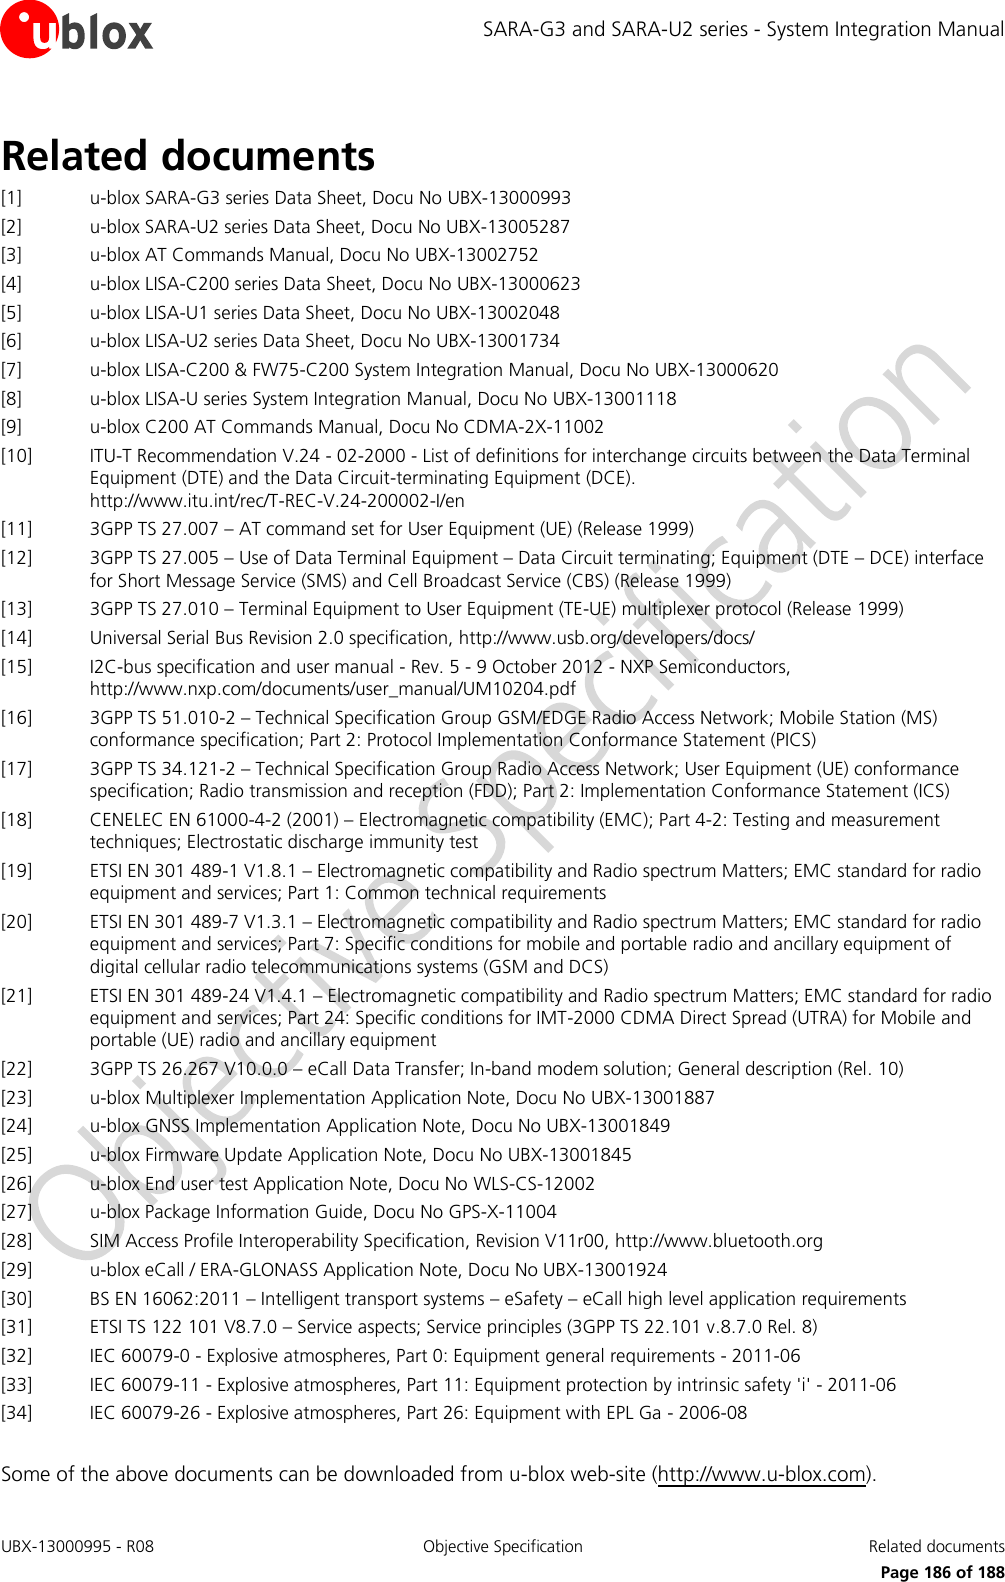 SARA-G3 and SARA-U2 series - System Integration Manual UBX-13000995 - R08  Objective Specification  Related documents      Page 186 of 188 Related documents [1] u-blox SARA-G3 series Data Sheet, Docu No UBX-13000993 [2] u-blox SARA-U2 series Data Sheet, Docu No UBX-13005287 [3] u-blox AT Commands Manual, Docu No UBX-13002752 [4] u-blox LISA-C200 series Data Sheet, Docu No UBX-13000623 [5] u-blox LISA-U1 series Data Sheet, Docu No UBX-13002048 [6] u-blox LISA-U2 series Data Sheet, Docu No UBX-13001734 [7] u-blox LISA-C200 &amp; FW75-C200 System Integration Manual, Docu No UBX-13000620 [8] u-blox LISA-U series System Integration Manual, Docu No UBX-13001118 [9] u-blox C200 AT Commands Manual, Docu No CDMA-2X-11002 [10] ITU-T Recommendation V.24 - 02-2000 - List of definitions for interchange circuits between the Data Terminal Equipment (DTE) and the Data Circuit-terminating Equipment (DCE).  http://www.itu.int/rec/T-REC-V.24-200002-I/en [11] 3GPP TS 27.007 – AT command set for User Equipment (UE) (Release 1999) [12] 3GPP TS 27.005 – Use of Data Terminal Equipment – Data Circuit terminating; Equipment (DTE – DCE) interface for Short Message Service (SMS) and Cell Broadcast Service (CBS) (Release 1999) [13] 3GPP TS 27.010 – Terminal Equipment to User Equipment (TE-UE) multiplexer protocol (Release 1999) [14] Universal Serial Bus Revision 2.0 specification, http://www.usb.org/developers/docs/ [15] I2C-bus specification and user manual - Rev. 5 - 9 October 2012 - NXP Semiconductors, http://www.nxp.com/documents/user_manual/UM10204.pdf  [16] 3GPP TS 51.010-2 – Technical Specification Group GSM/EDGE Radio Access Network; Mobile Station (MS) conformance specification; Part 2: Protocol Implementation Conformance Statement (PICS)  [17] 3GPP TS 34.121-2 – Technical Specification Group Radio Access Network; User Equipment (UE) conformance specification; Radio transmission and reception (FDD); Part 2: Implementation Conformance Statement (ICS) [18] CENELEC EN 61000-4-2 (2001) – Electromagnetic compatibility (EMC); Part 4-2: Testing and measurement techniques; Electrostatic discharge immunity test [19] ETSI EN 301 489-1 V1.8.1 – Electromagnetic compatibility and Radio spectrum Matters; EMC standard for radio equipment and services; Part 1: Common technical requirements [20] ETSI EN 301 489-7 V1.3.1 – Electromagnetic compatibility and Radio spectrum Matters; EMC standard for radio equipment and services; Part 7: Specific conditions for mobile and portable radio and ancillary equipment of digital cellular radio telecommunications systems (GSM and DCS) [21] ETSI EN 301 489-24 V1.4.1 – Electromagnetic compatibility and Radio spectrum Matters; EMC standard for radio equipment and services; Part 24: Specific conditions for IMT-2000 CDMA Direct Spread (UTRA) for Mobile and portable (UE) radio and ancillary equipment [22] 3GPP TS 26.267 V10.0.0 – eCall Data Transfer; In-band modem solution; General description (Rel. 10) [23] u-blox Multiplexer Implementation Application Note, Docu No UBX-13001887 [24] u-blox GNSS Implementation Application Note, Docu No UBX-13001849 [25] u-blox Firmware Update Application Note, Docu No UBX-13001845 [26] u-blox End user test Application Note, Docu No WLS-CS-12002 [27] u-blox Package Information Guide, Docu No GPS-X-11004 [28] SIM Access Profile Interoperability Specification, Revision V11r00, http://www.bluetooth.org [29] u-blox eCall / ERA-GLONASS Application Note, Docu No UBX-13001924 [30] BS EN 16062:2011 – Intelligent transport systems – eSafety – eCall high level application requirements [31] ETSI TS 122 101 V8.7.0 – Service aspects; Service principles (3GPP TS 22.101 v.8.7.0 Rel. 8) [32] IEC 60079-0 - Explosive atmospheres, Part 0: Equipment general requirements - 2011-06 [33] IEC 60079-11 - Explosive atmospheres, Part 11: Equipment protection by intrinsic safety &apos;i&apos; - 2011-06 [34] IEC 60079-26 - Explosive atmospheres, Part 26: Equipment with EPL Ga - 2006-08  Some of the above documents can be downloaded from u-blox web-site (http://www.u-blox.com). 